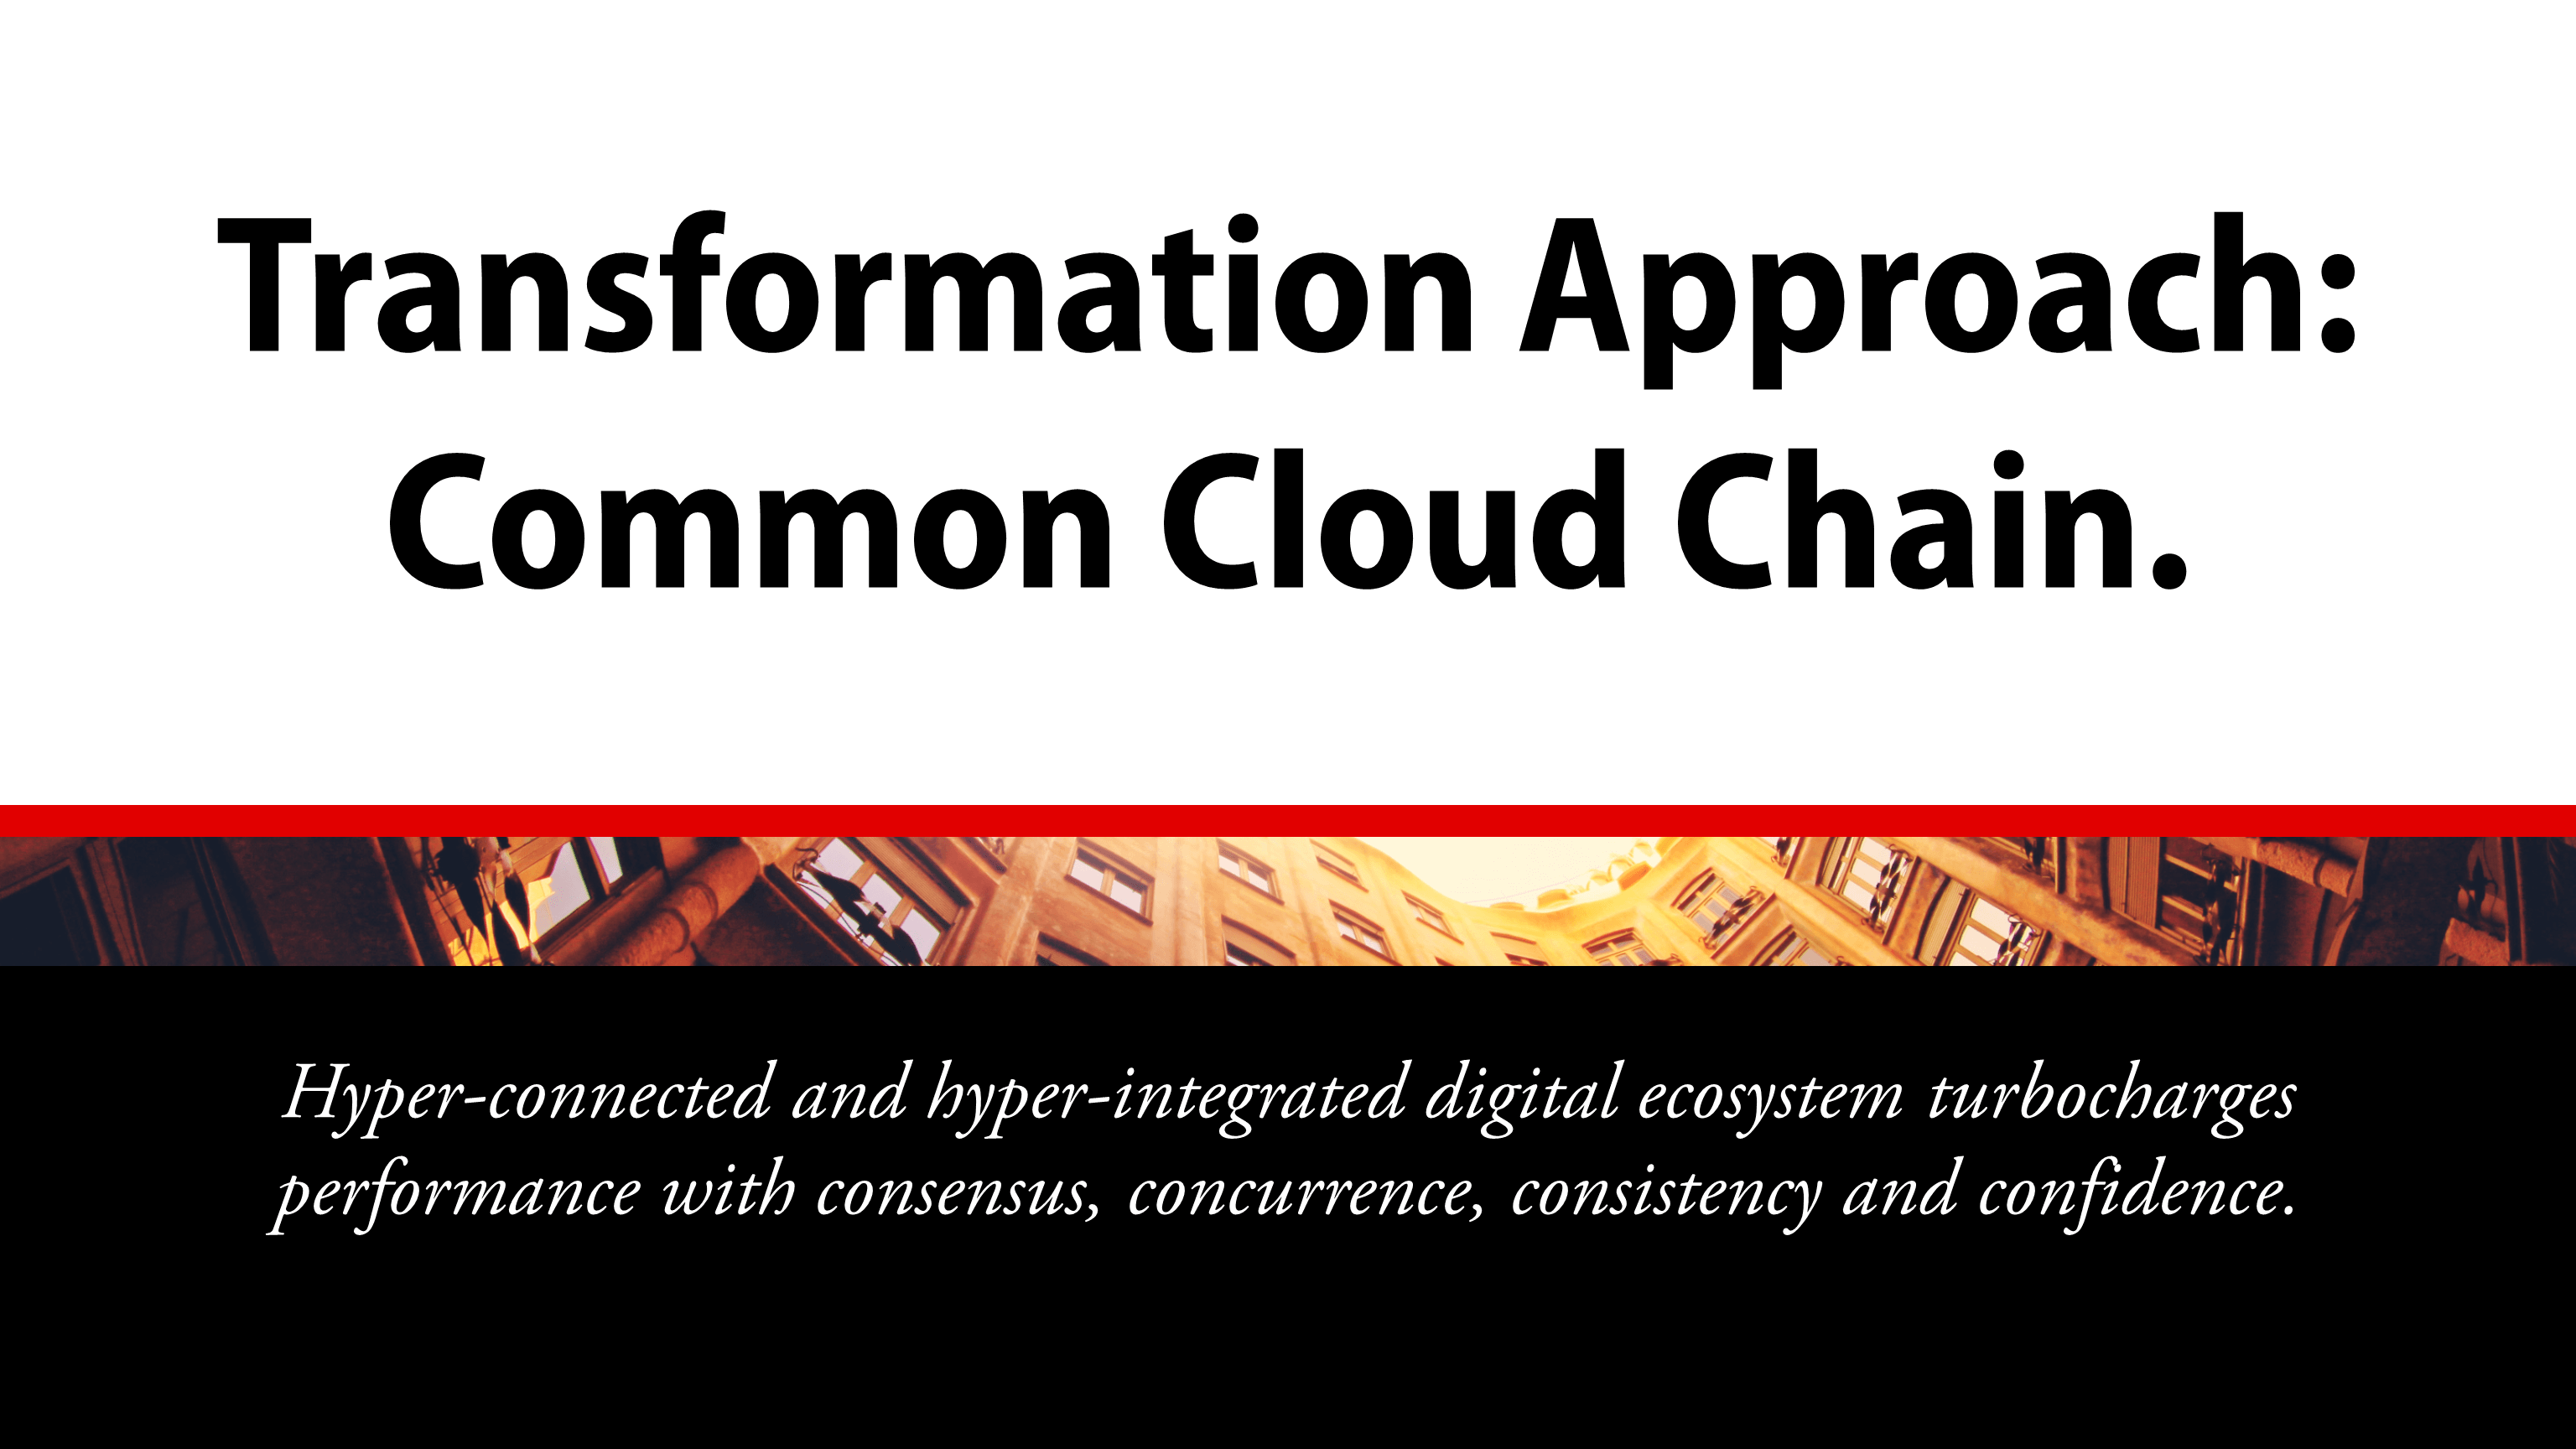 CCC Transformation Approach